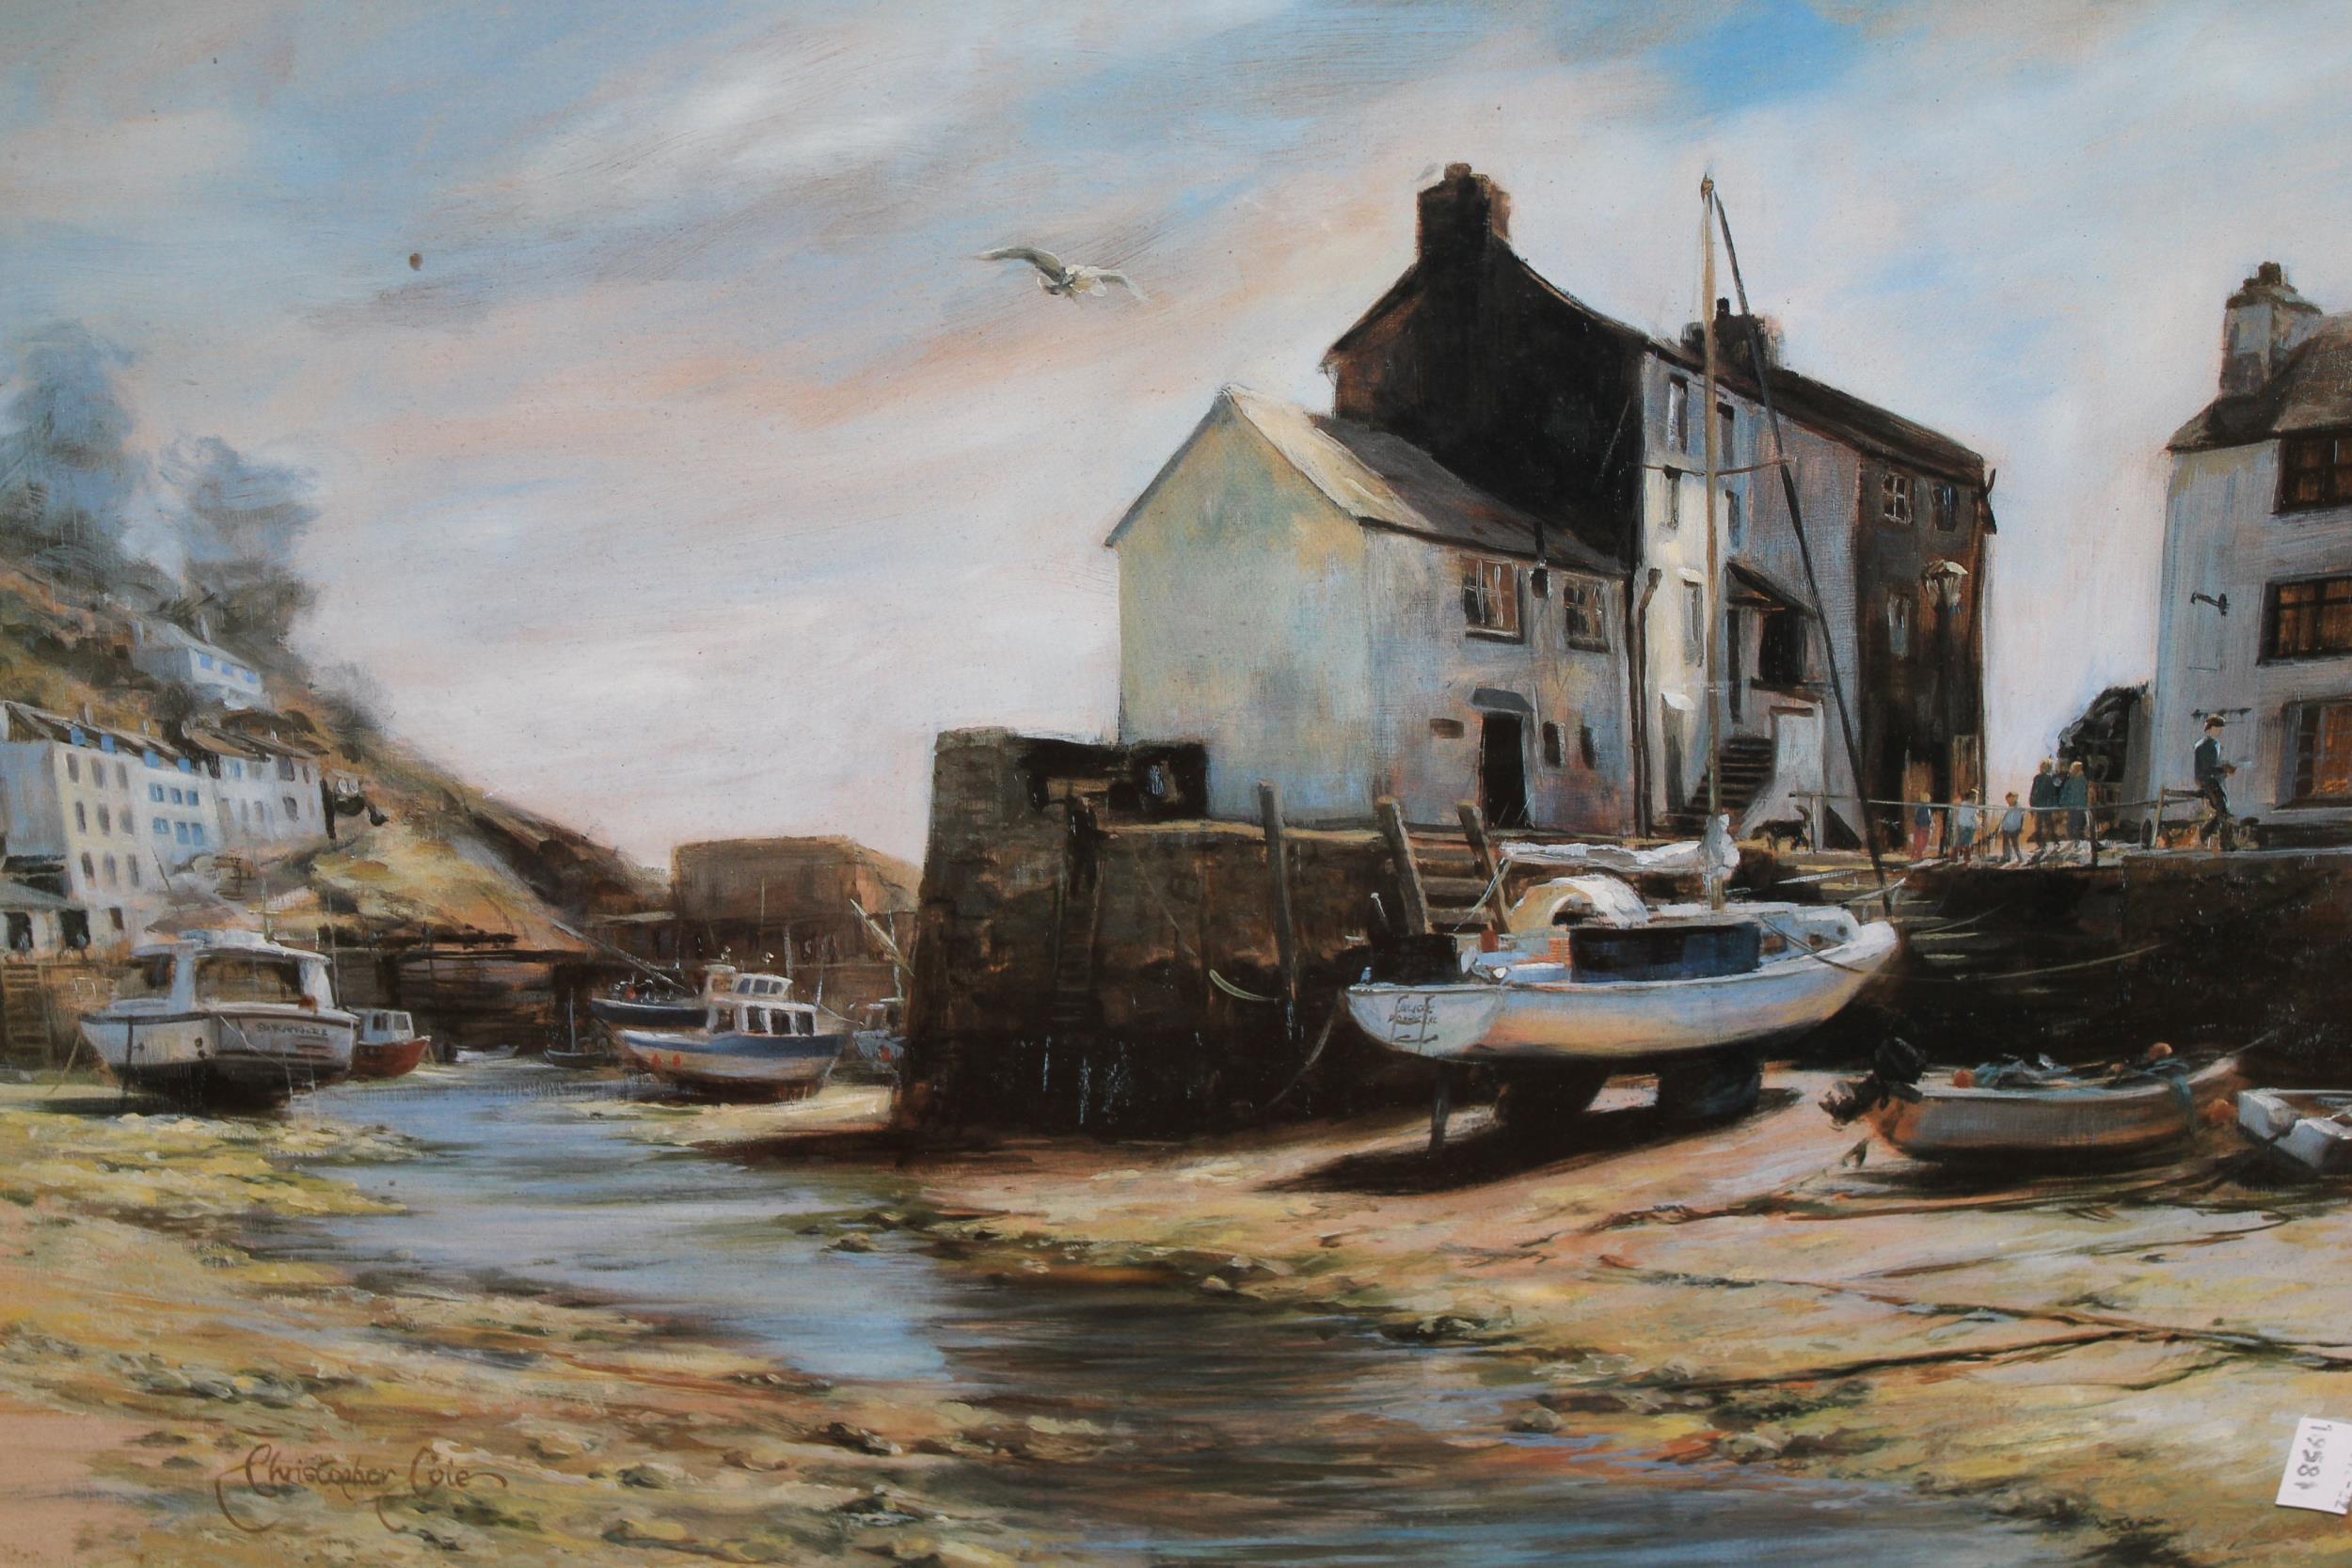 Christopher Cole, Limited Edition coloured print, titled ' Low Tide at Polperro ' signed by the